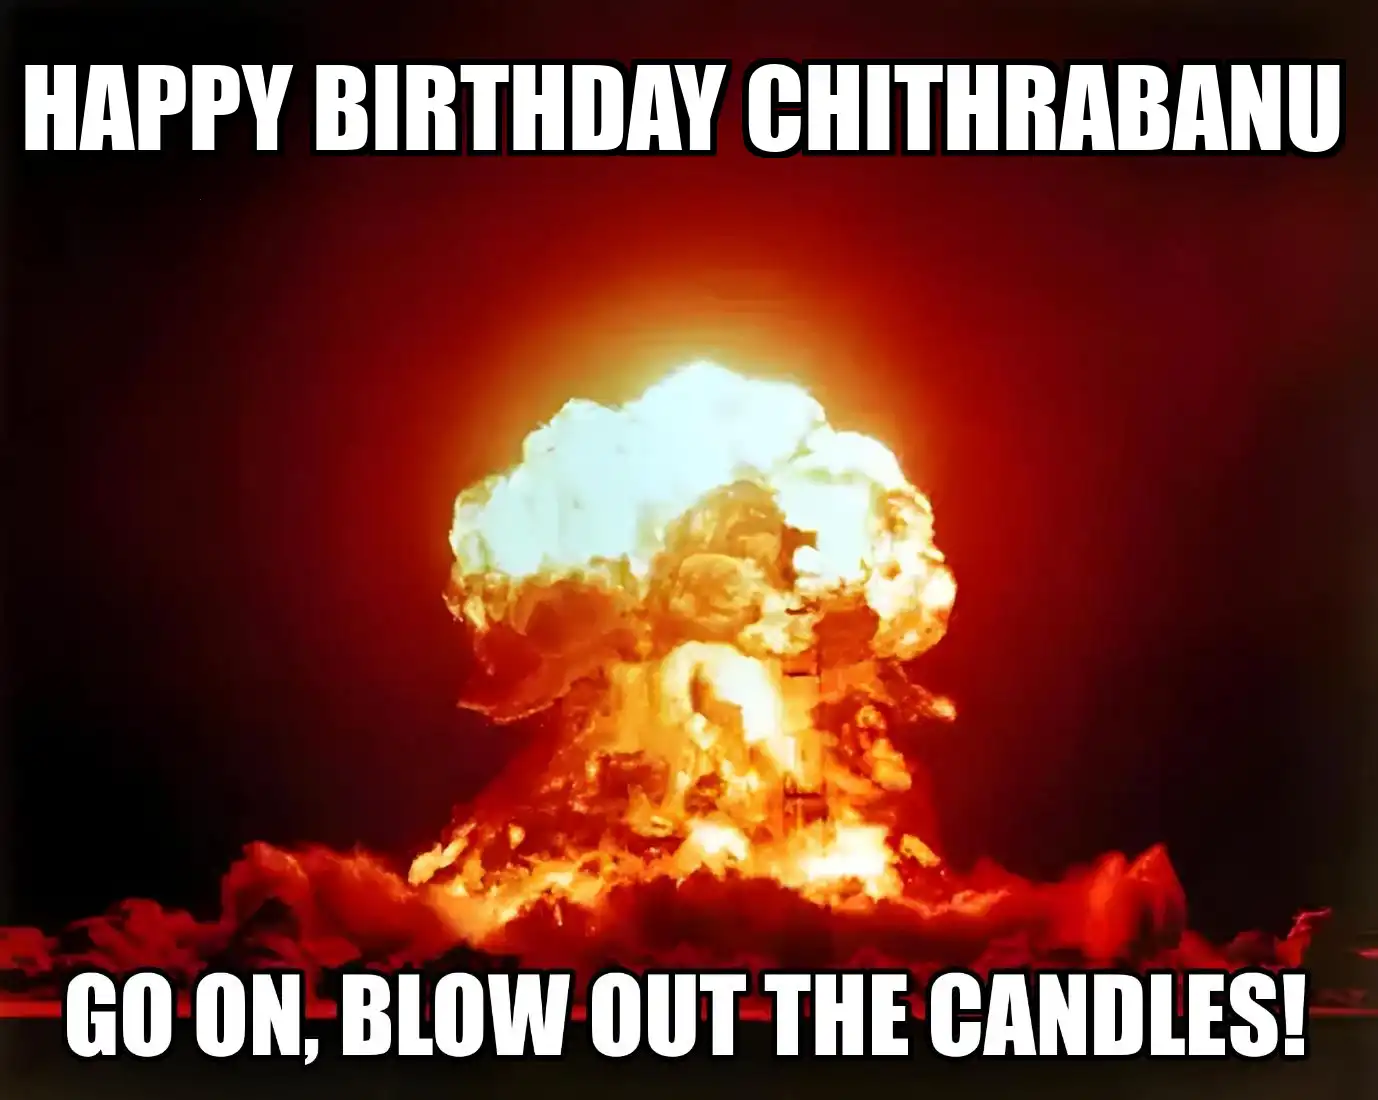 Happy Birthday Chithrabanu Go On Blow Out The Candles Meme